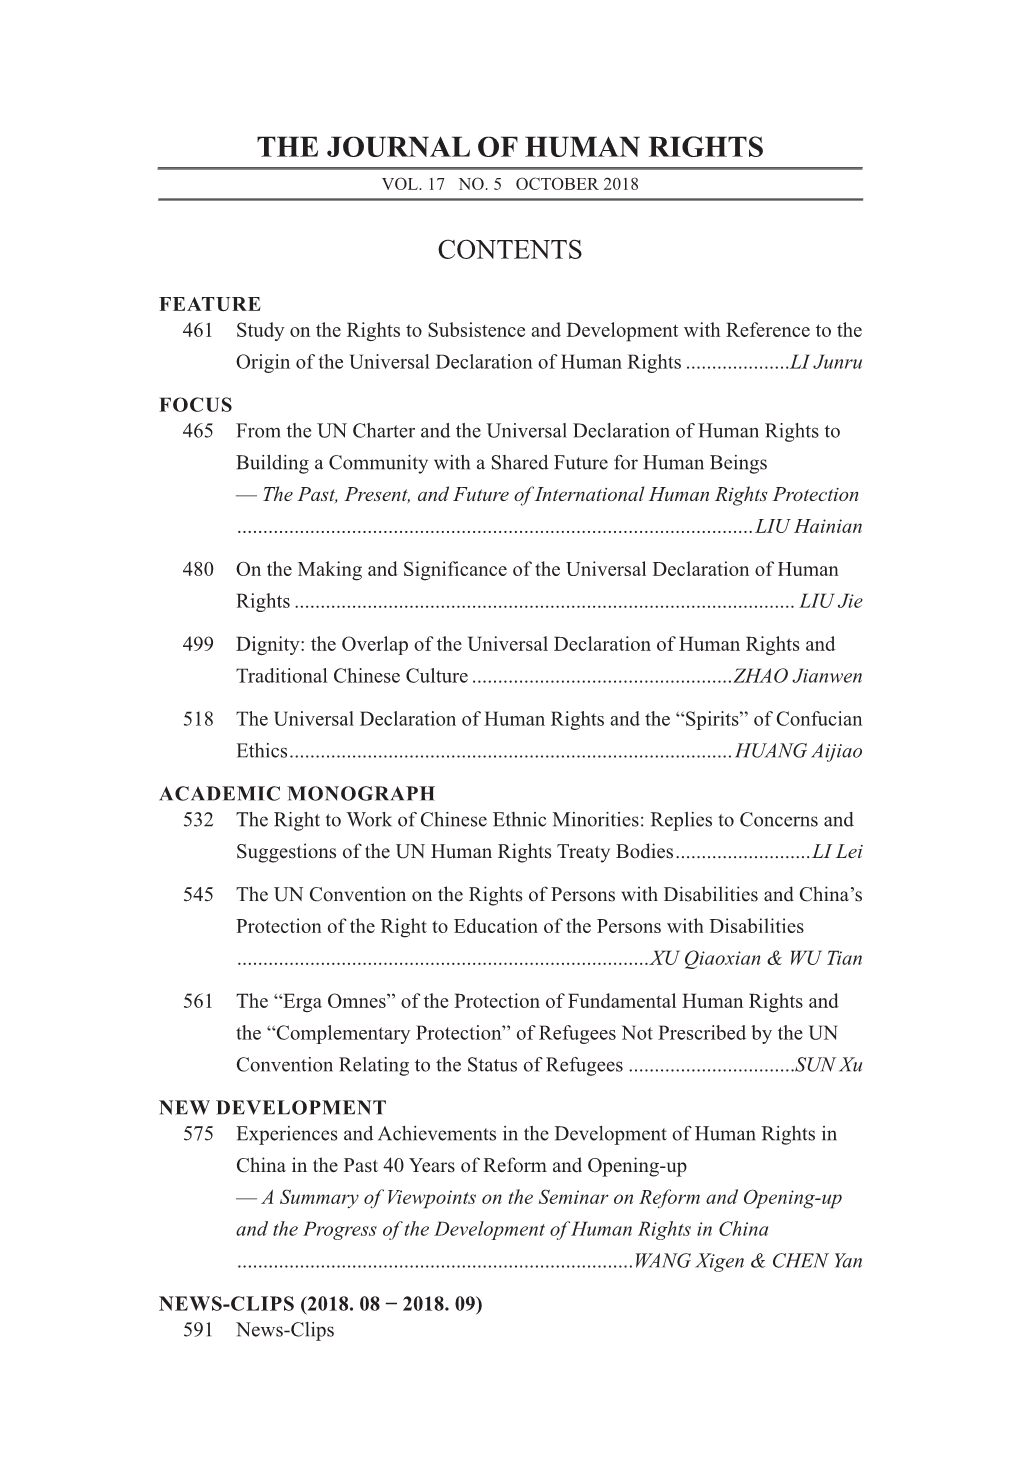 The Journal of Human Rights Vol